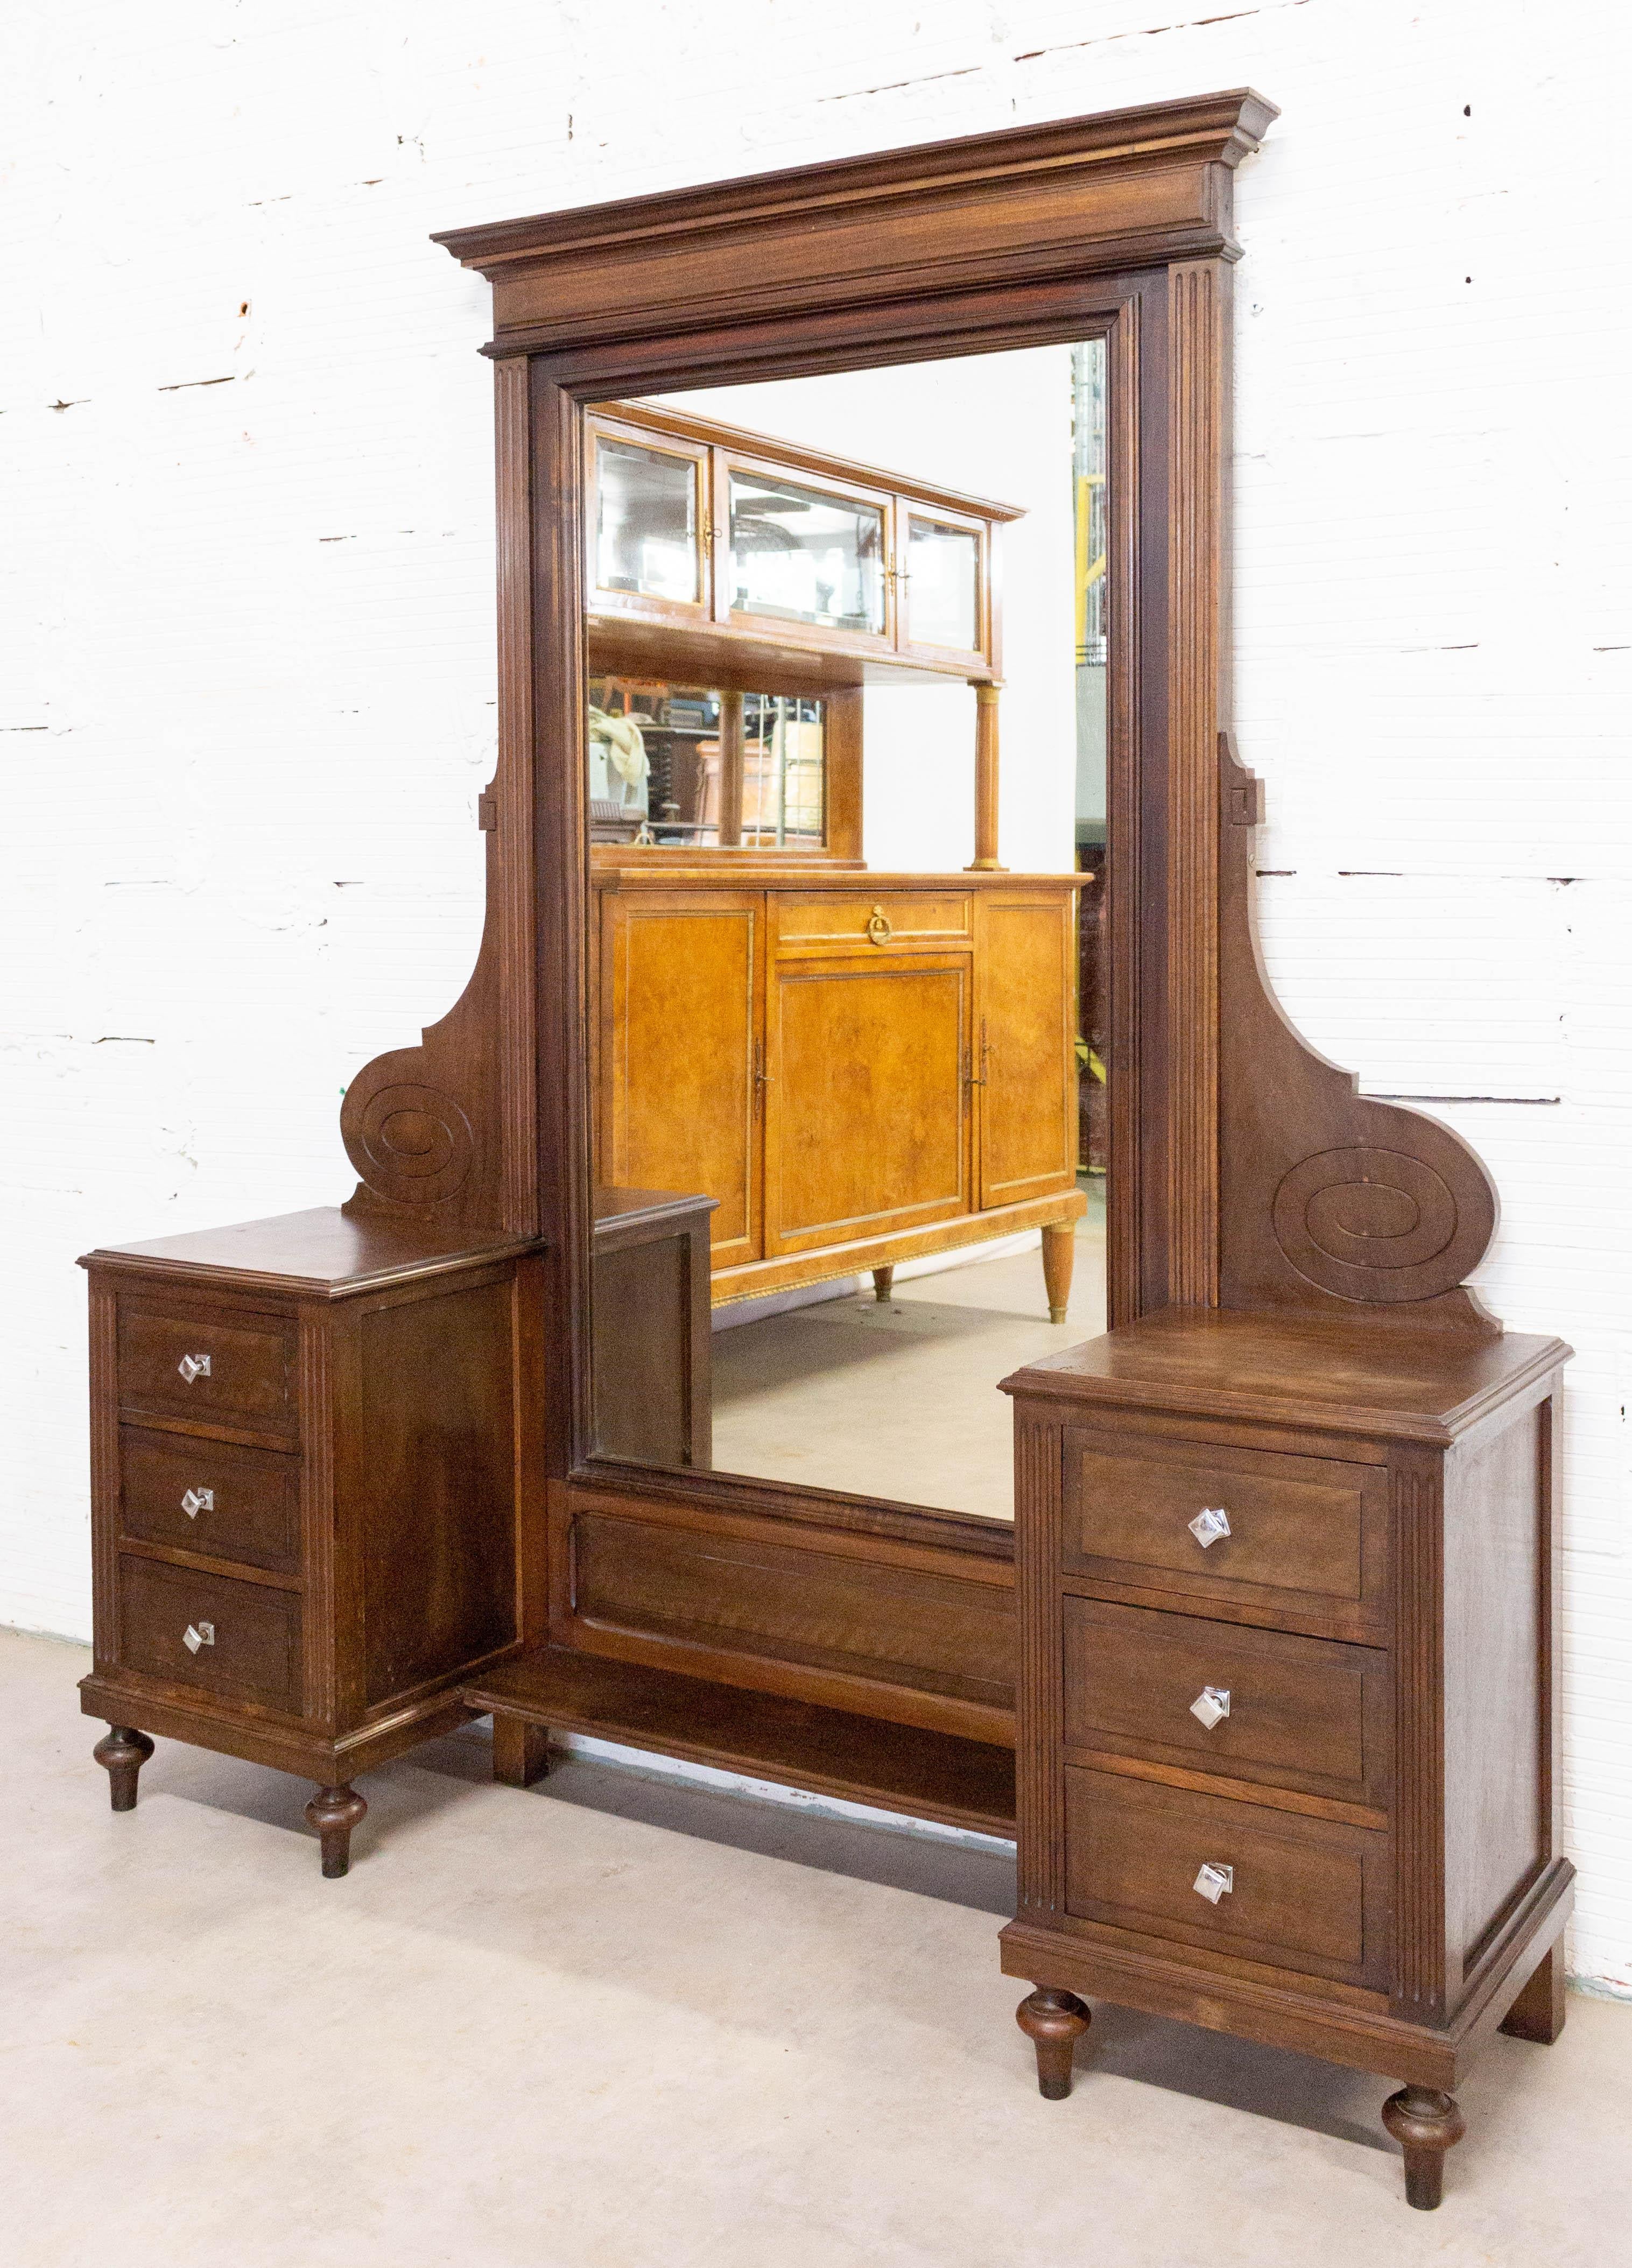 Dressing table with central psyche mirror, circa 1940.
Side tables either side with three drawers on each side.
Beveled mirror and walnut.
Very good vintage condition.

Shipping:
L 154/P 38/H 176 70 kg.